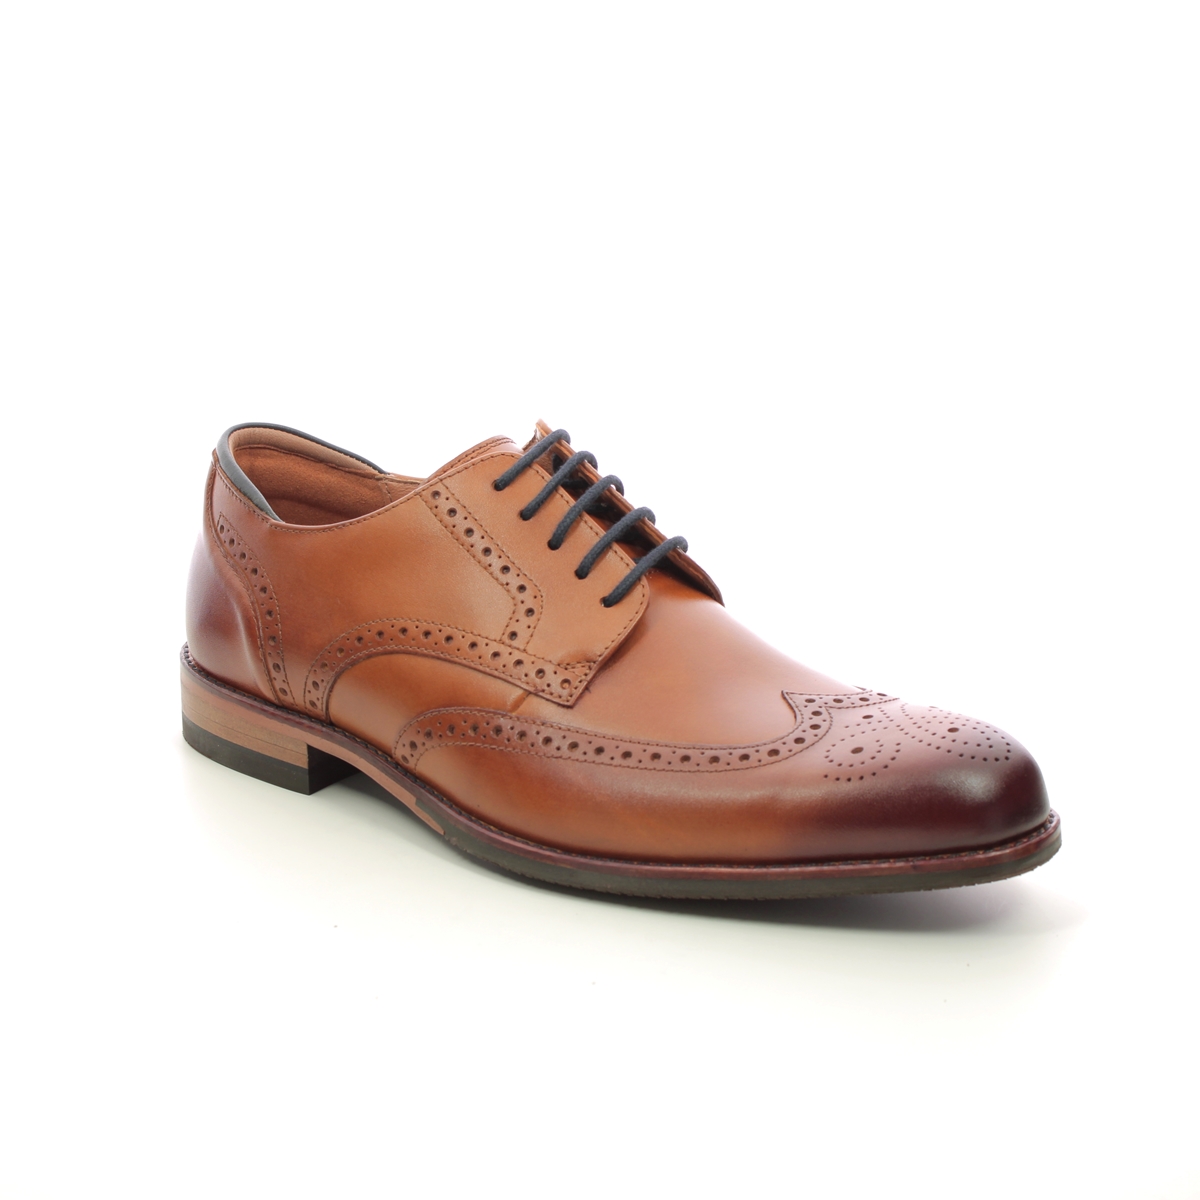 Craftarlo Limit G Fit Leather Brogues